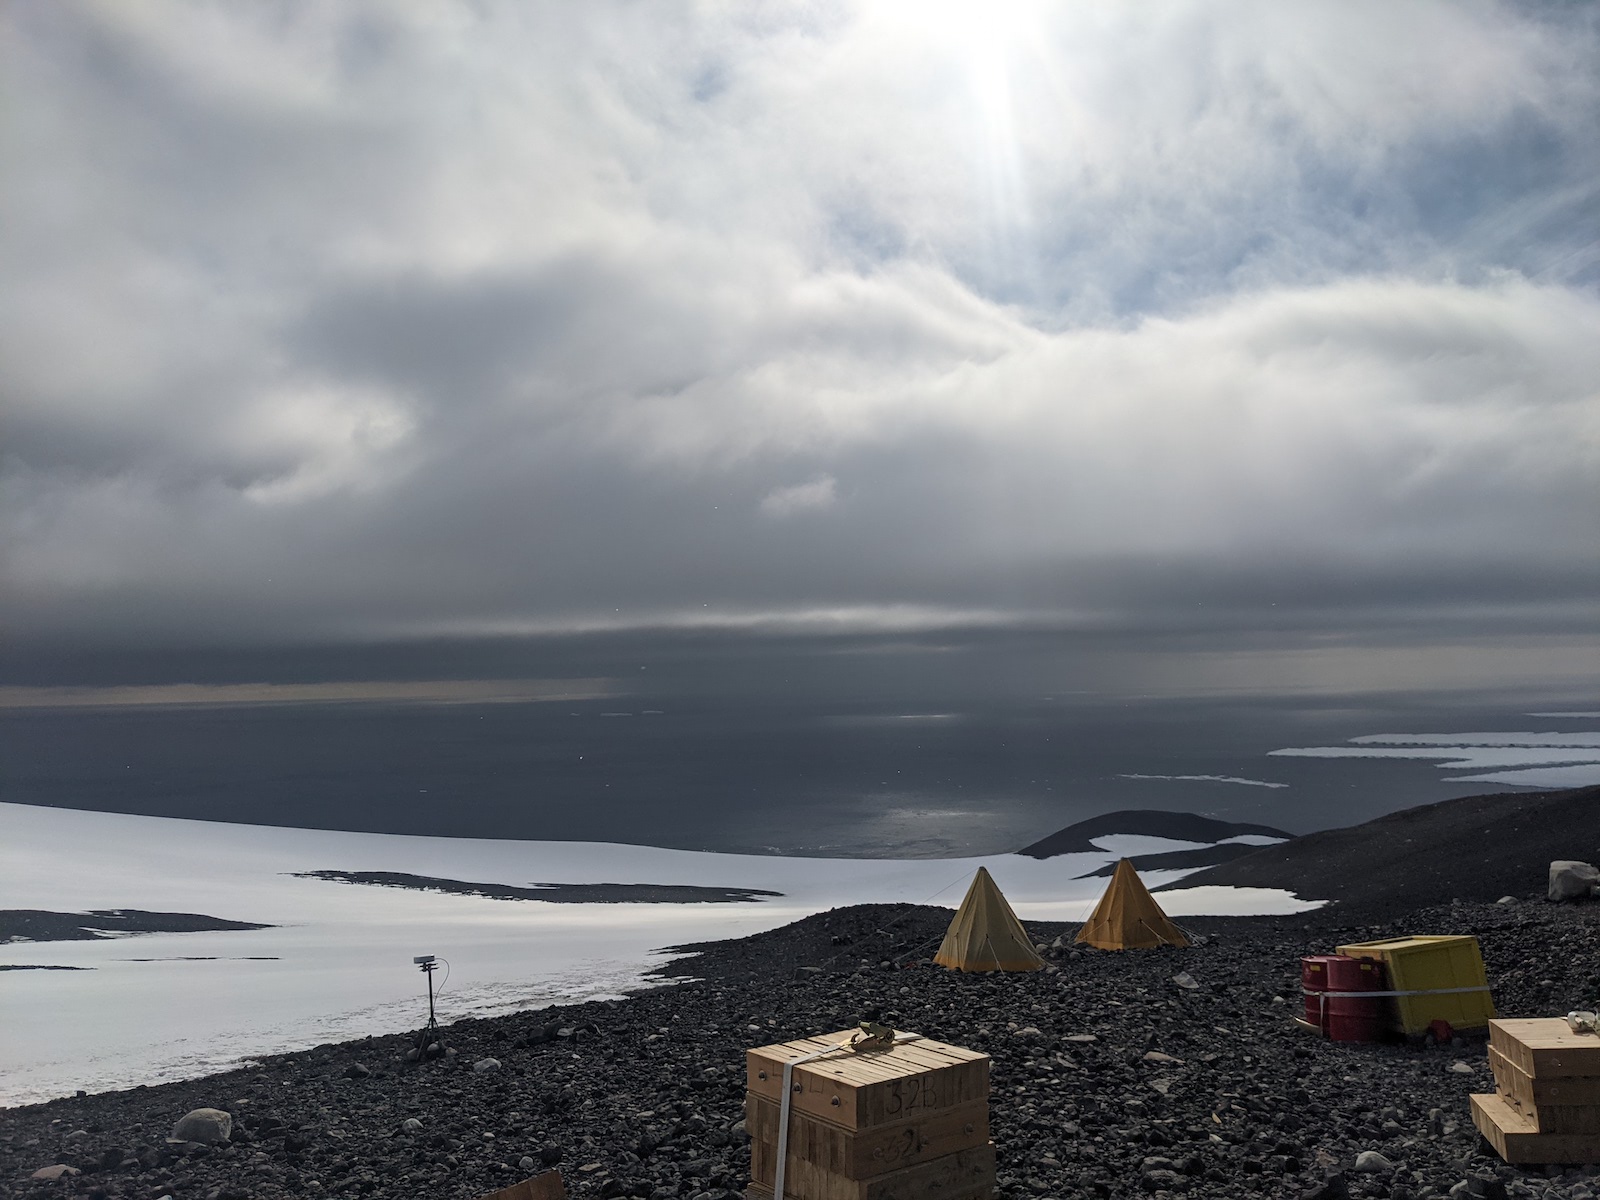 Cape Crozier, sleeping in Scott tents, with the ocean and Ross Ice Shelf in the background.